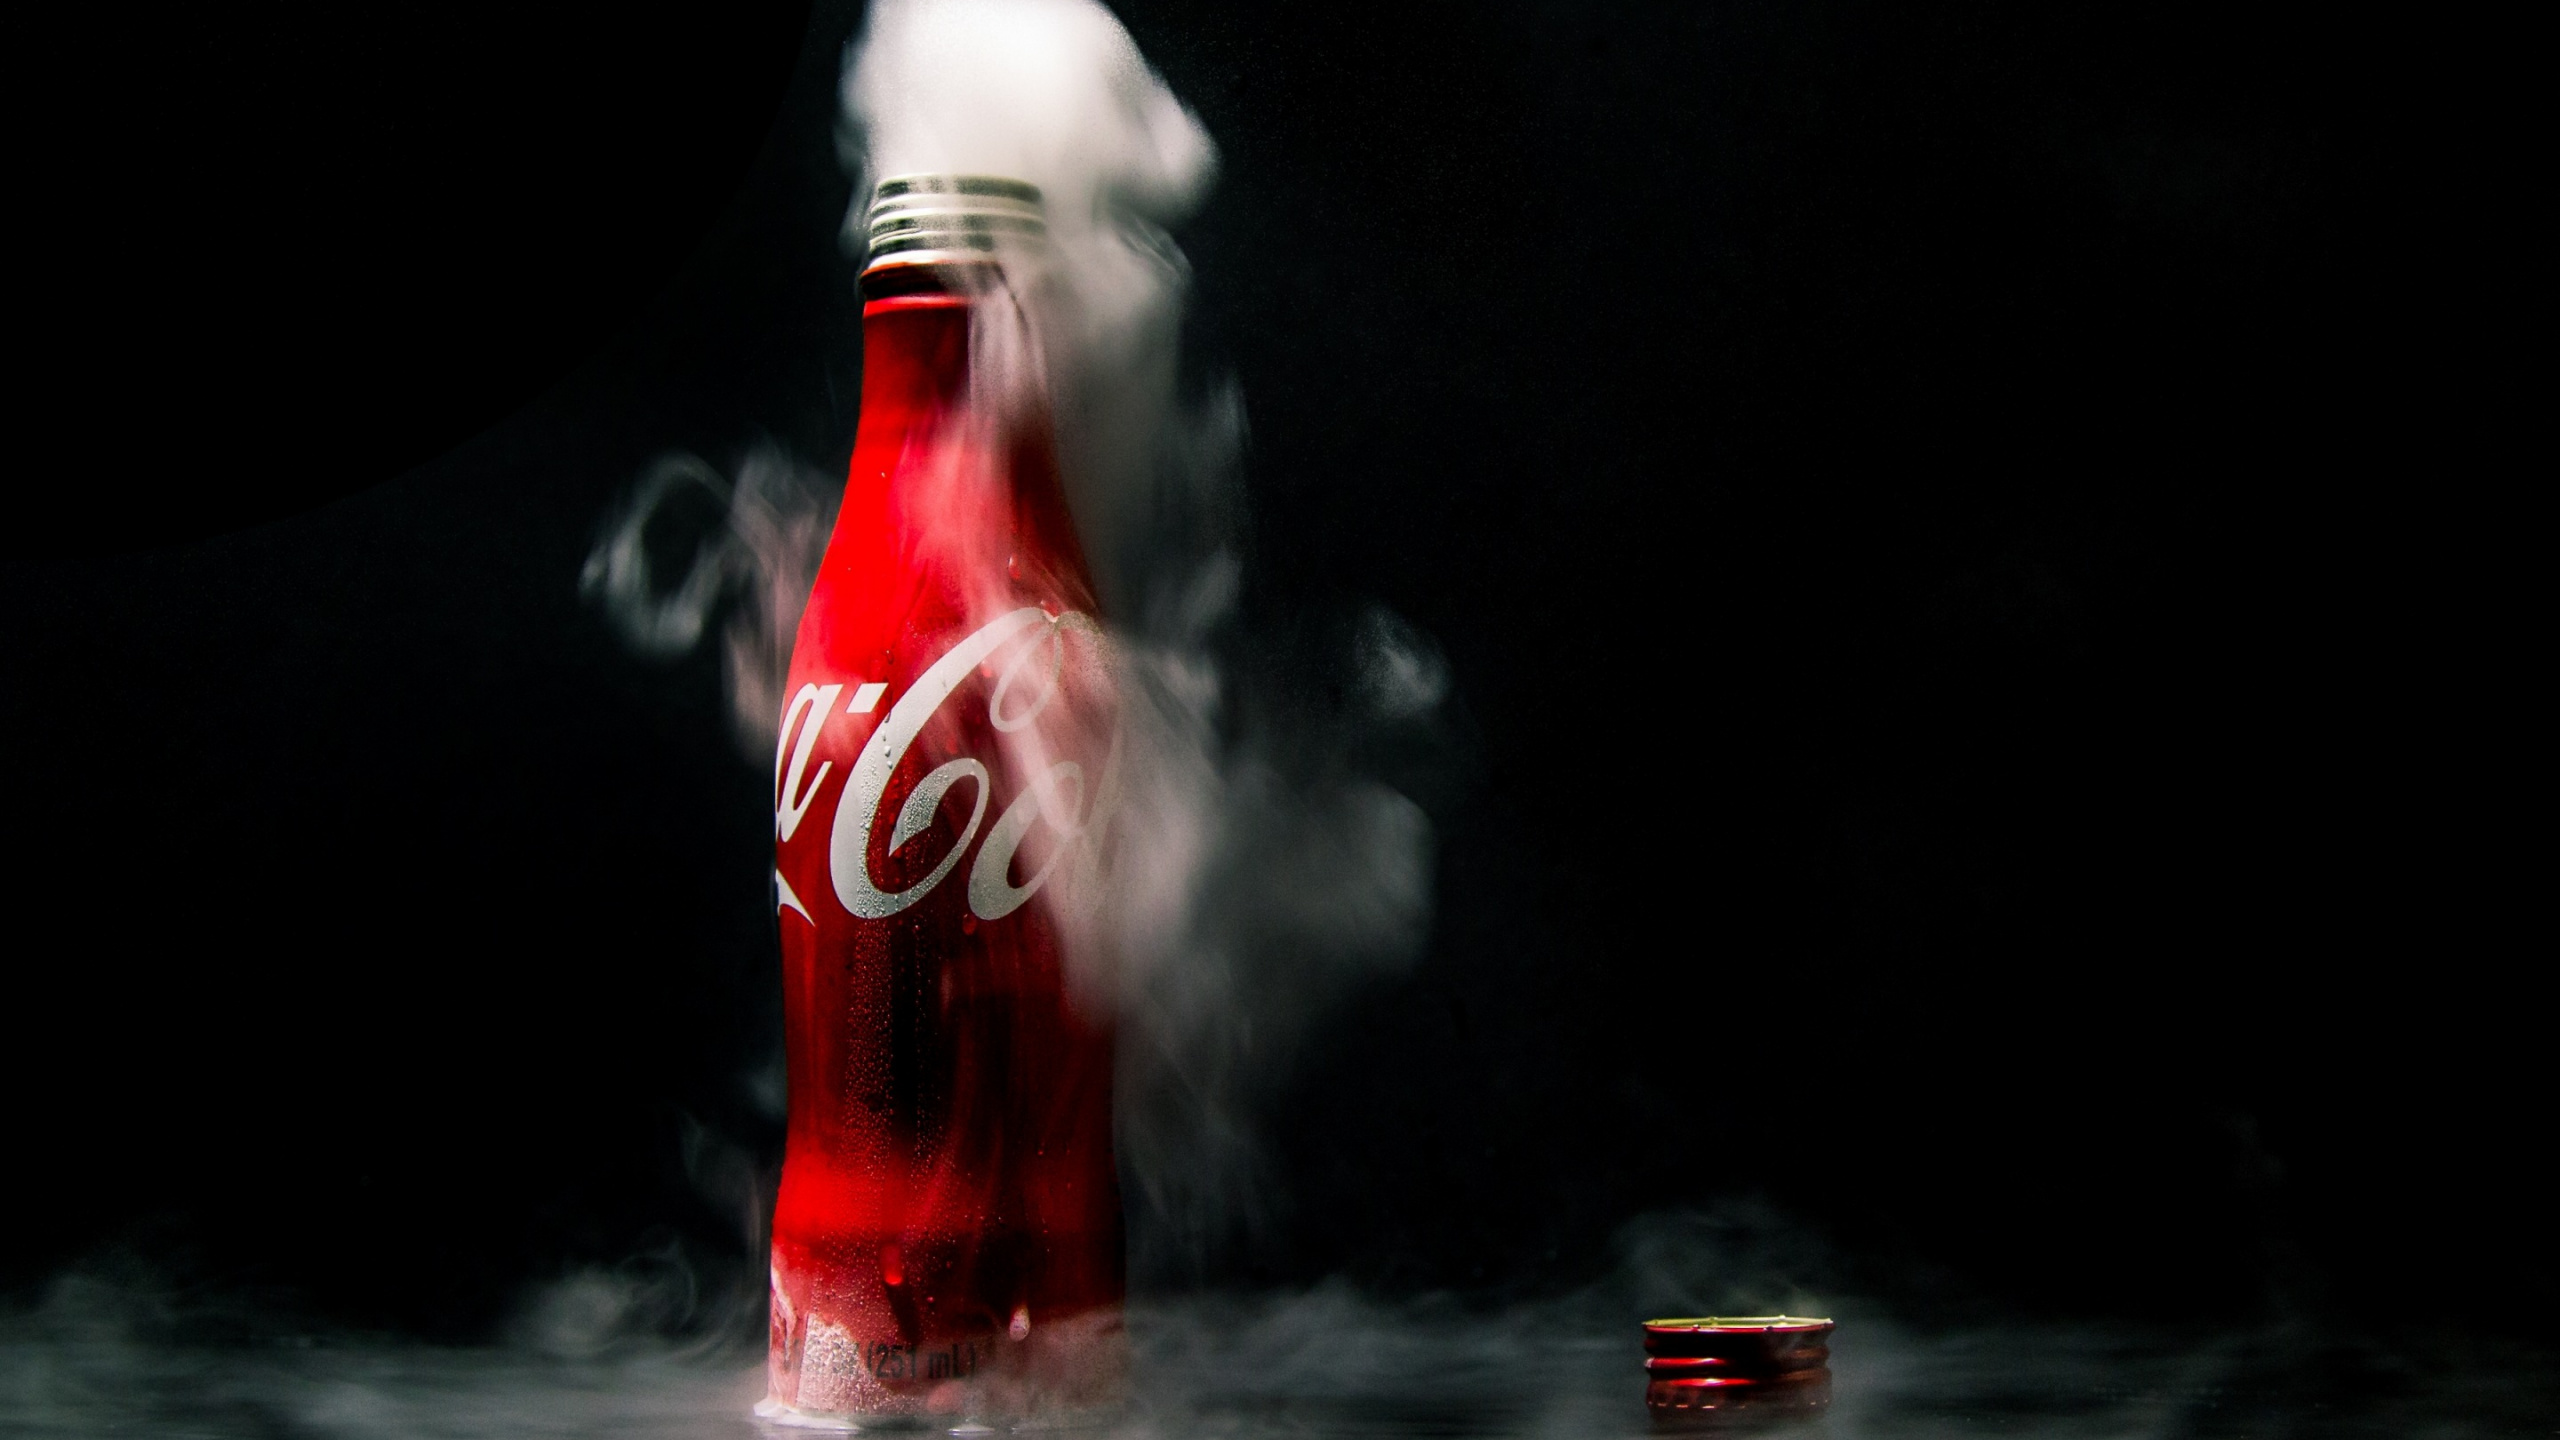 Coca Cola Bottle on Water. Wallpaper in 2560x1440 Resolution